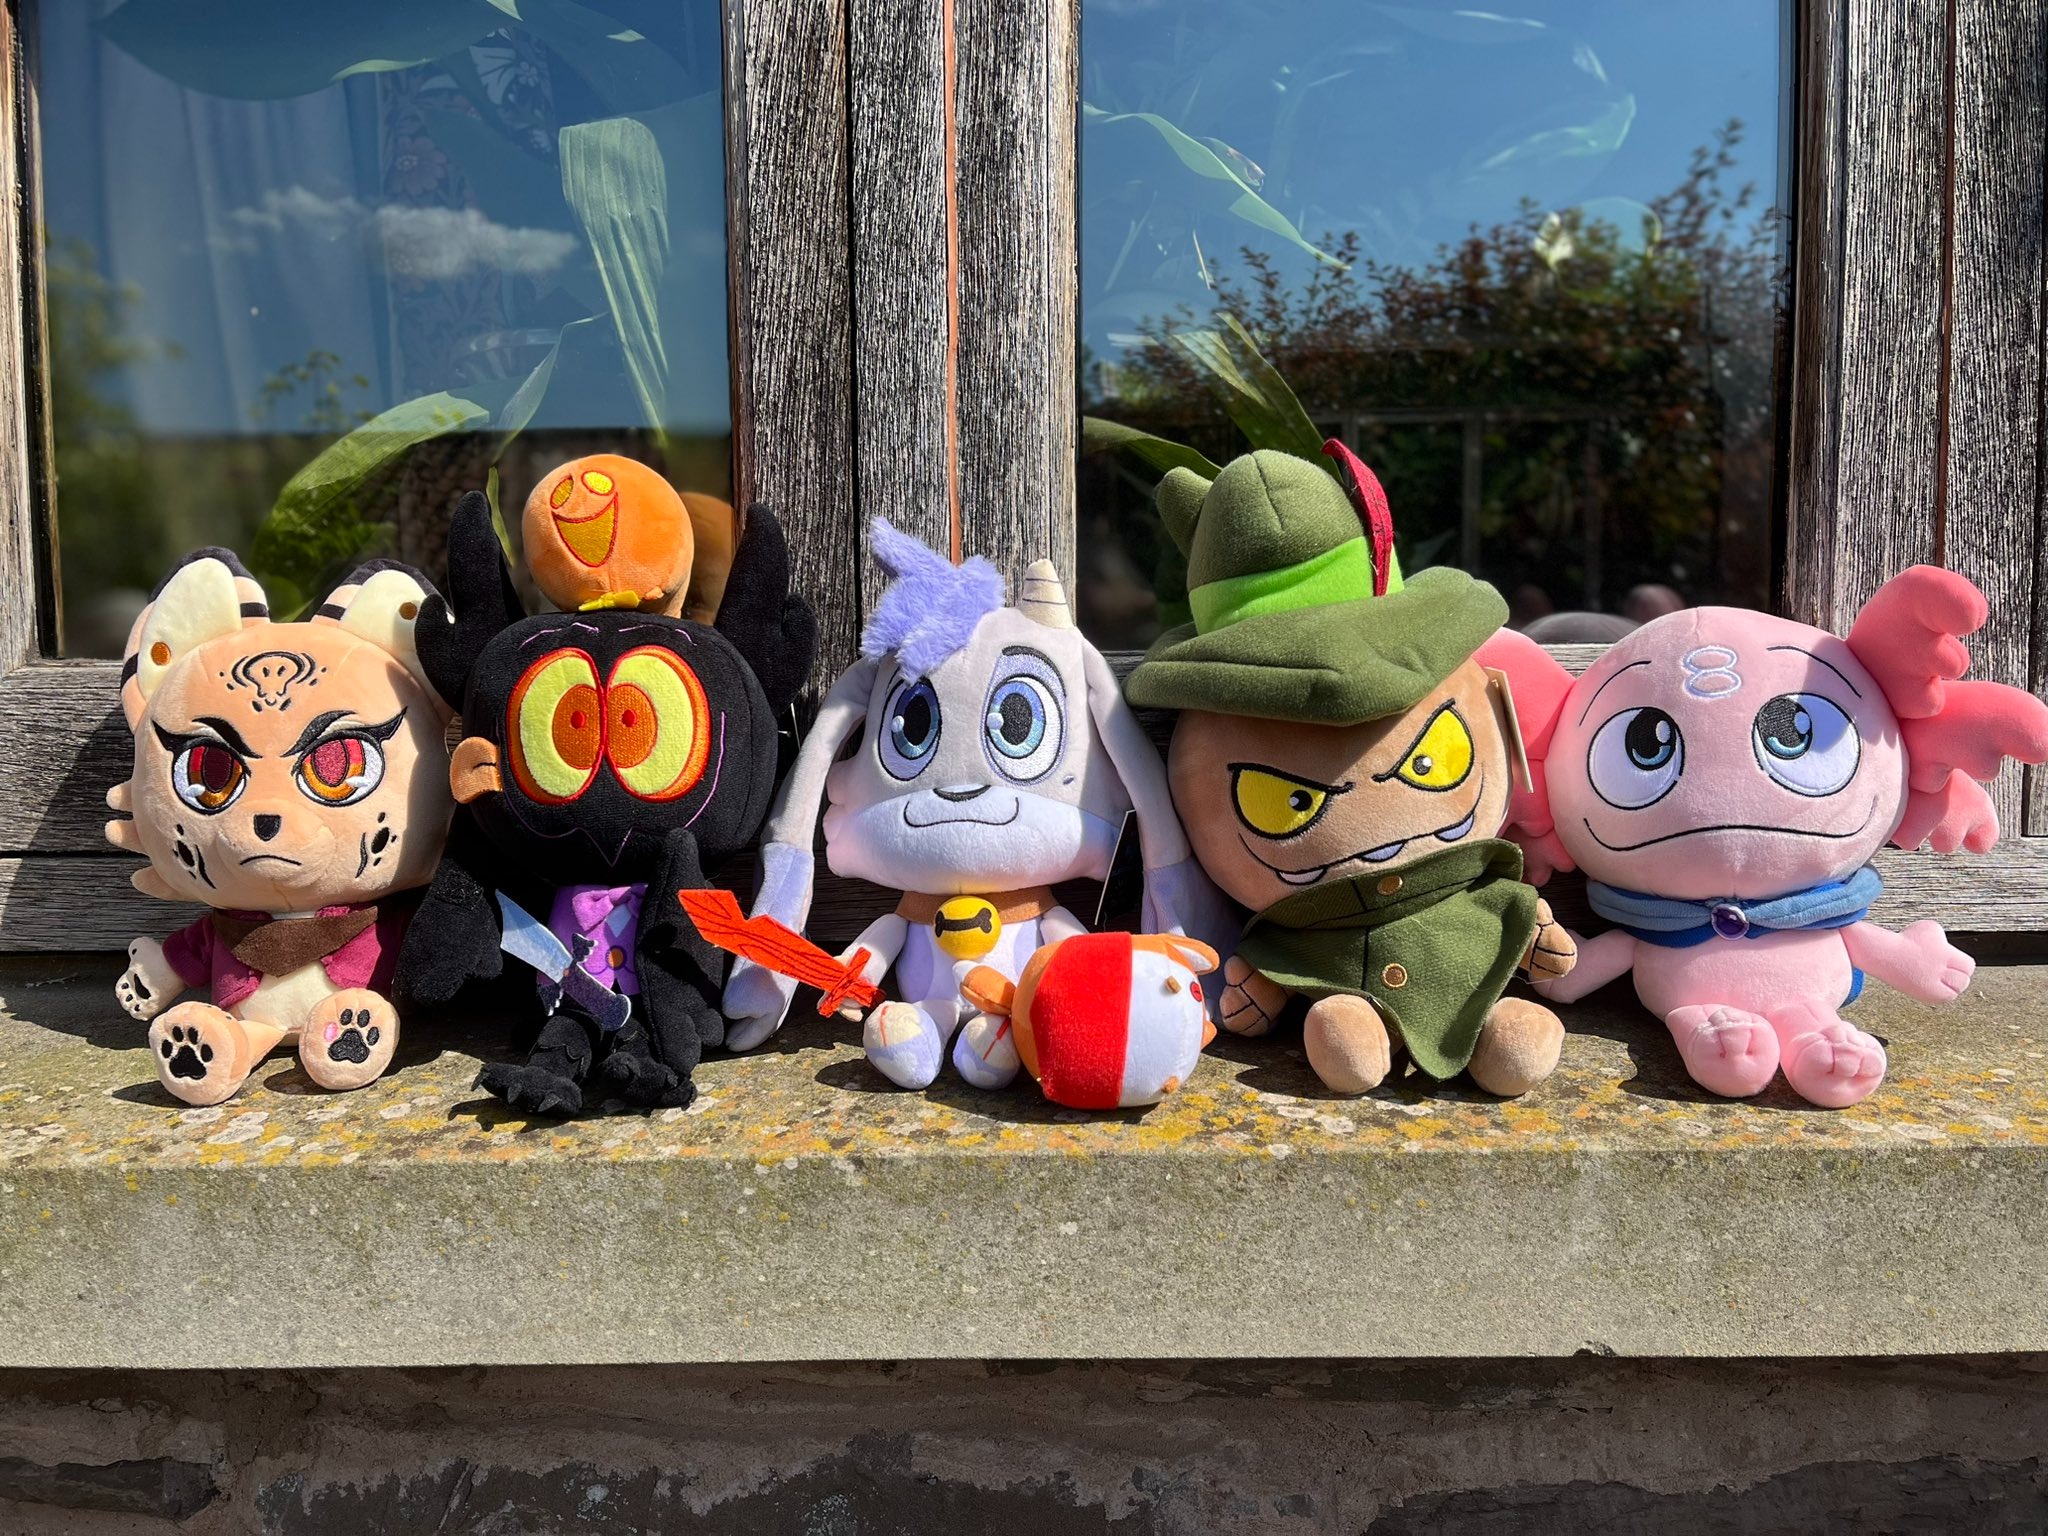 Bringing Home a Piece of the Magic: Billie Bust Up Plushies Review